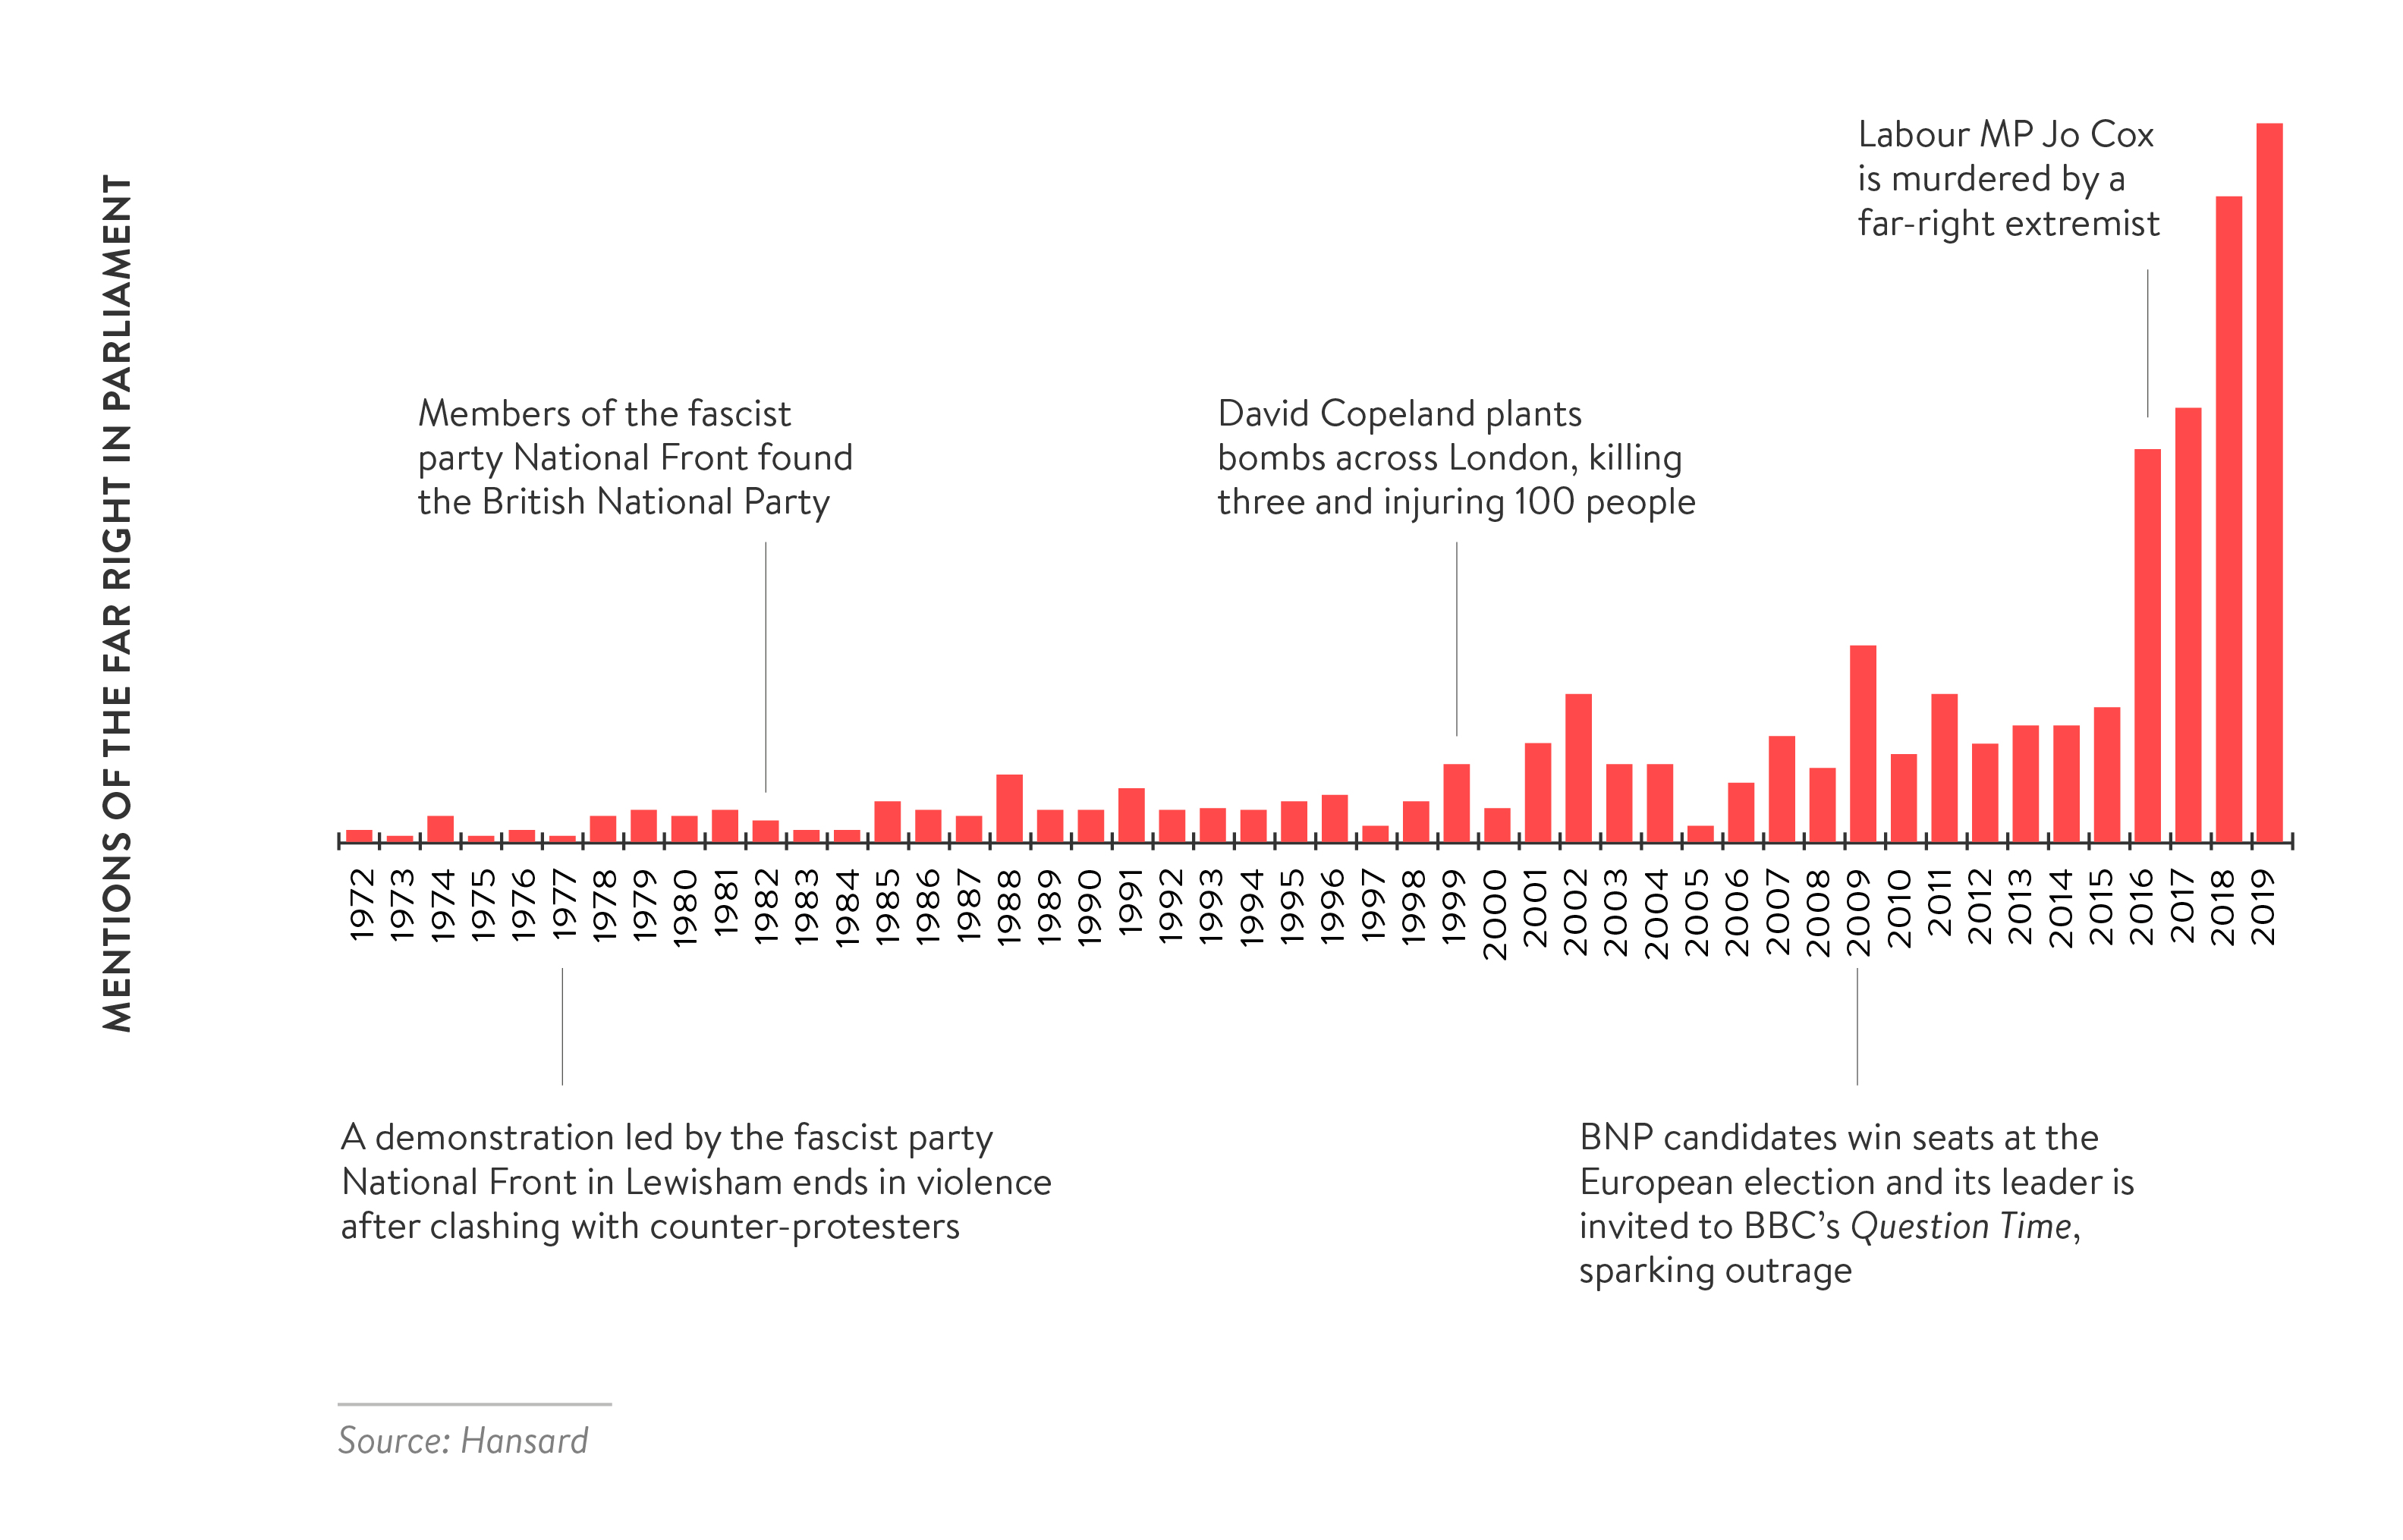 narratives-hate-spectrum-far-right-worldviews-uk - Figure 1.1: Mentions of the far right in Parliament